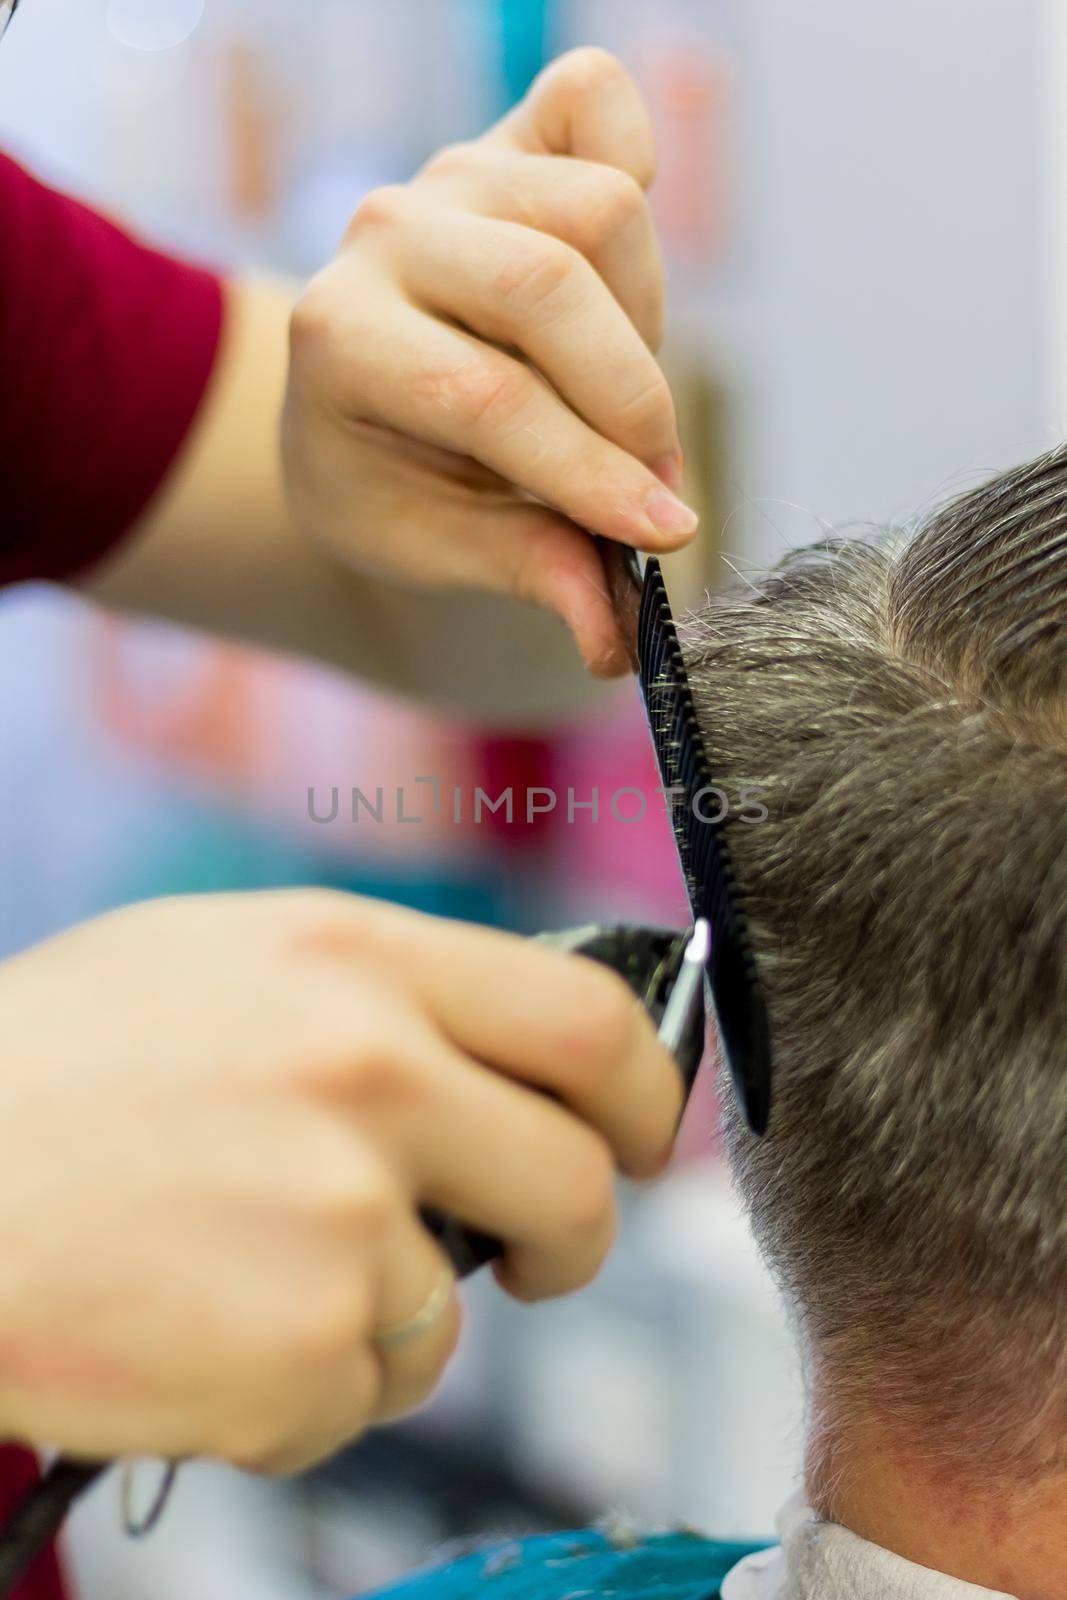 The hairdresser cuts the man's hair with a clipper and comb. Short men's haircut. Close-up.